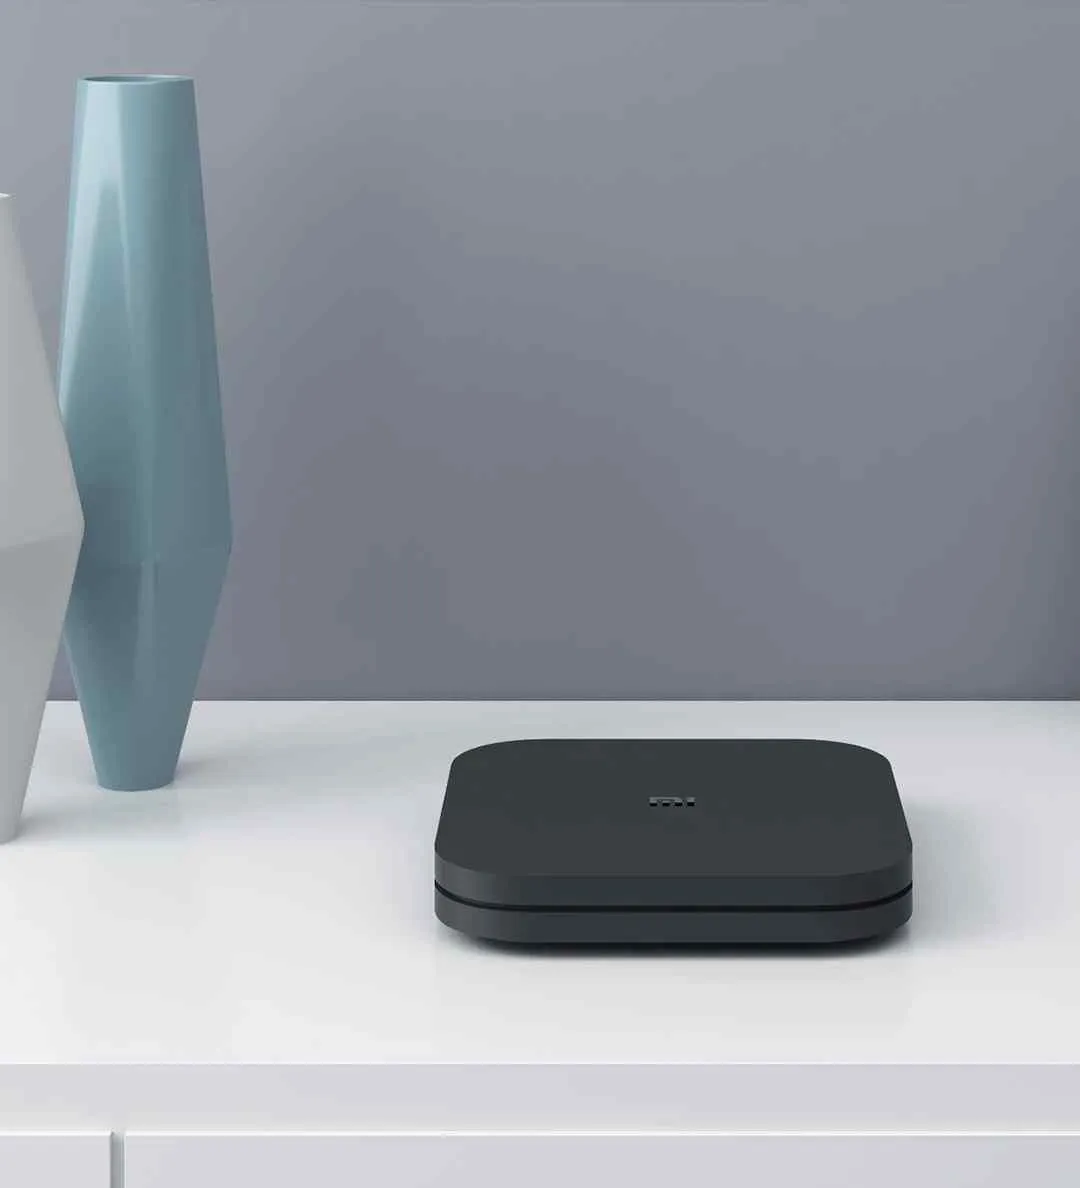 Xiaomi Mi Box S Review: The best Android TV for most users